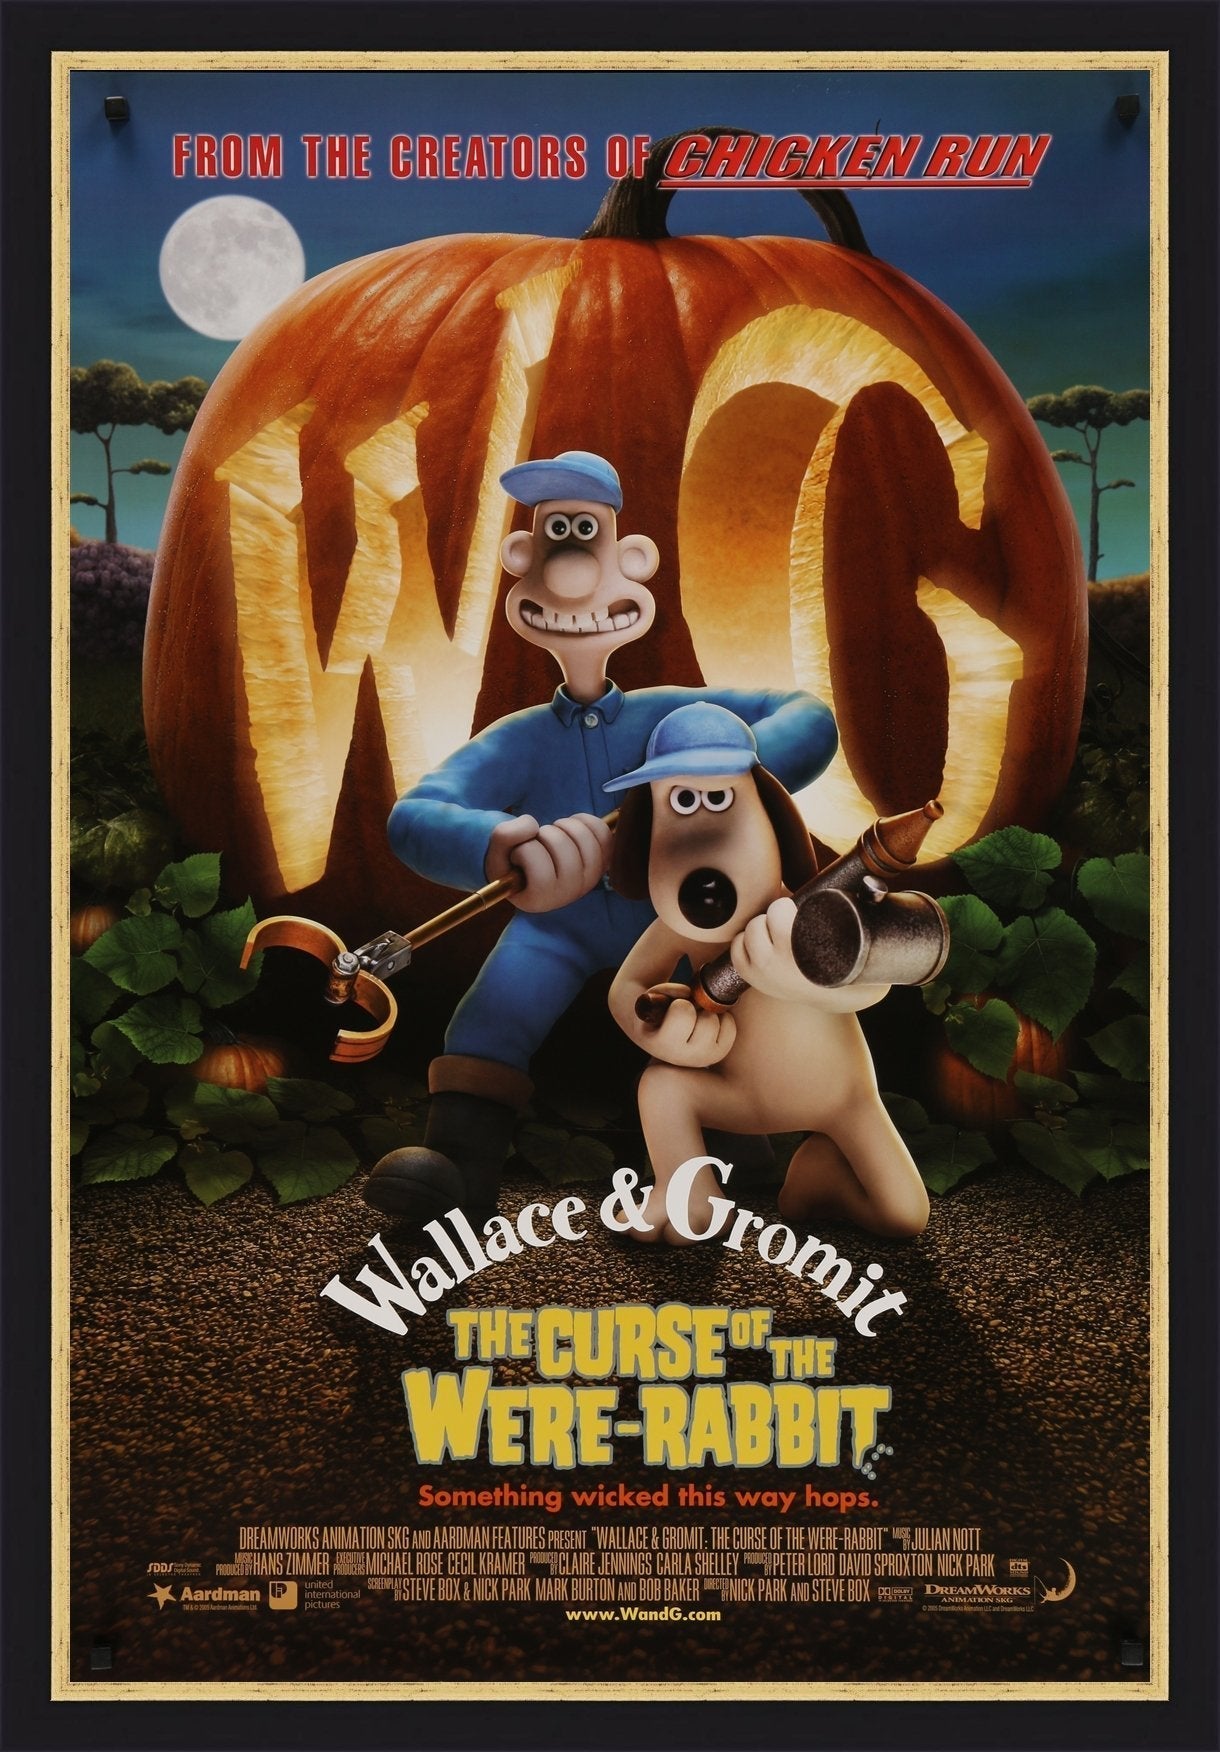 An original movie poster for the Aardman film Wallace and Gromit The Curse of the Were Rabbit